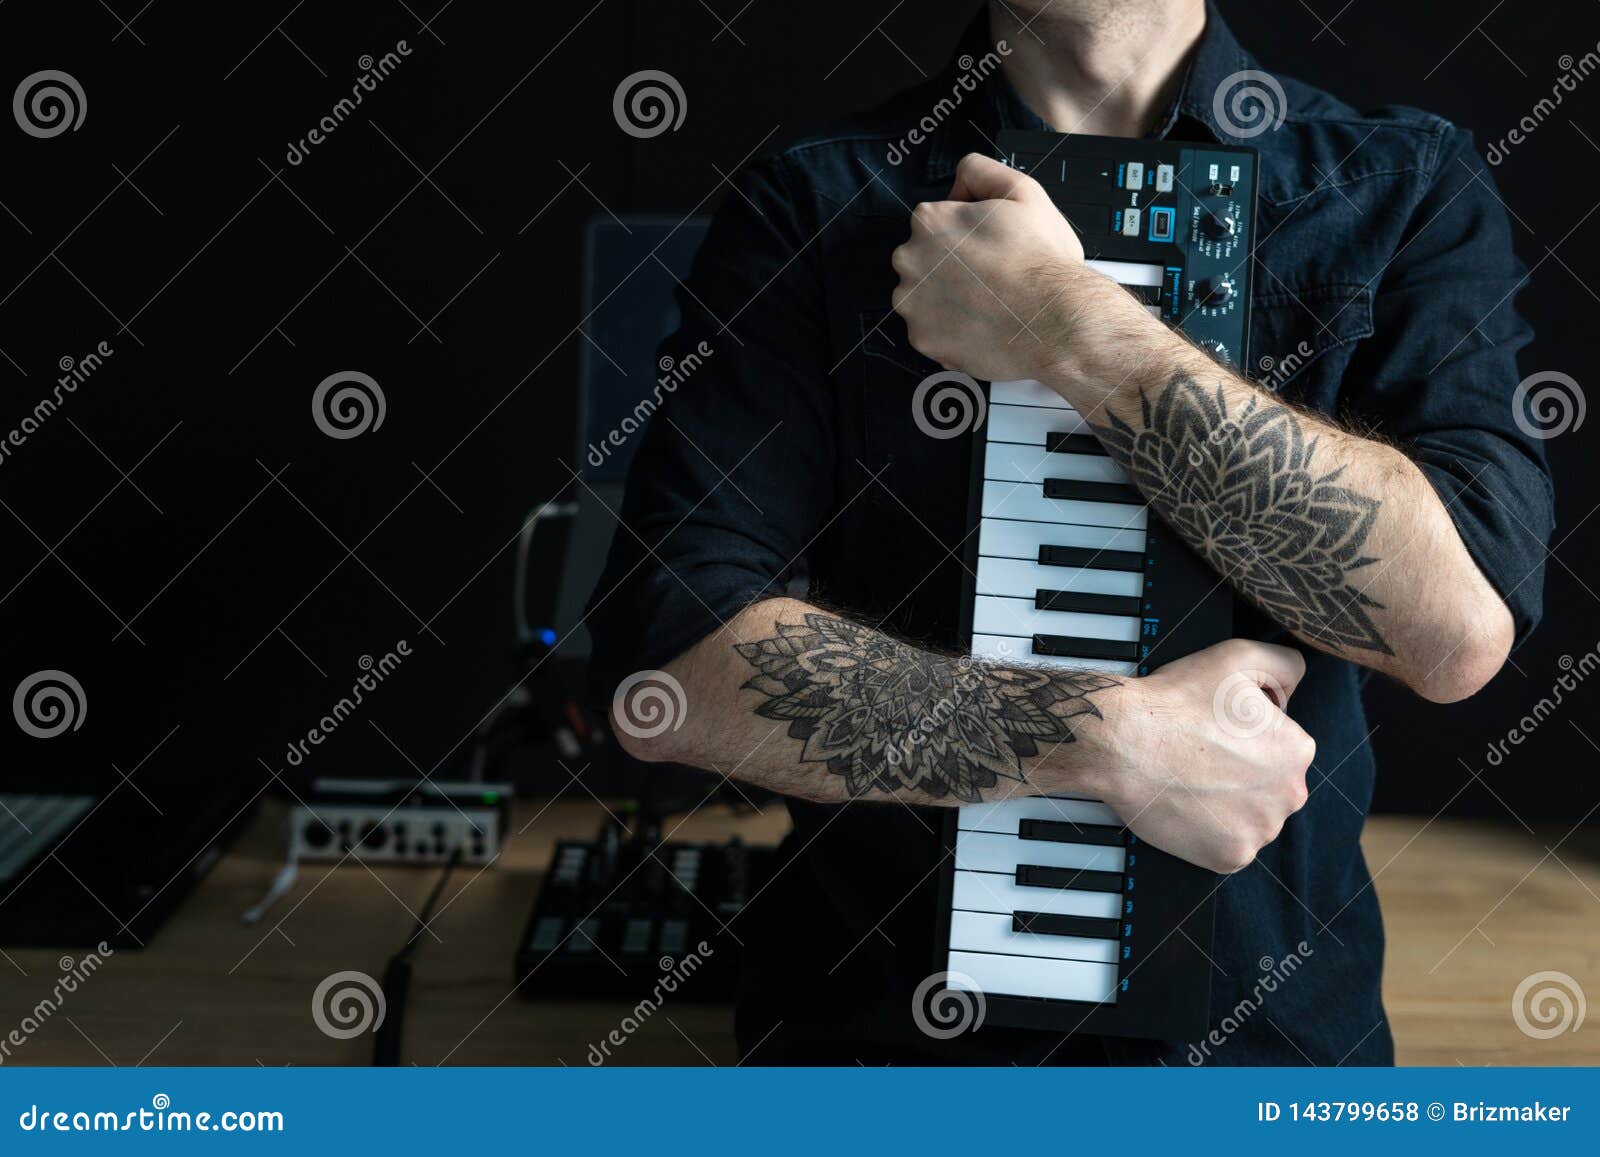 Man Holding Piano Keyboard In His Hands Stock Photo Image Of Performance Male 143799658